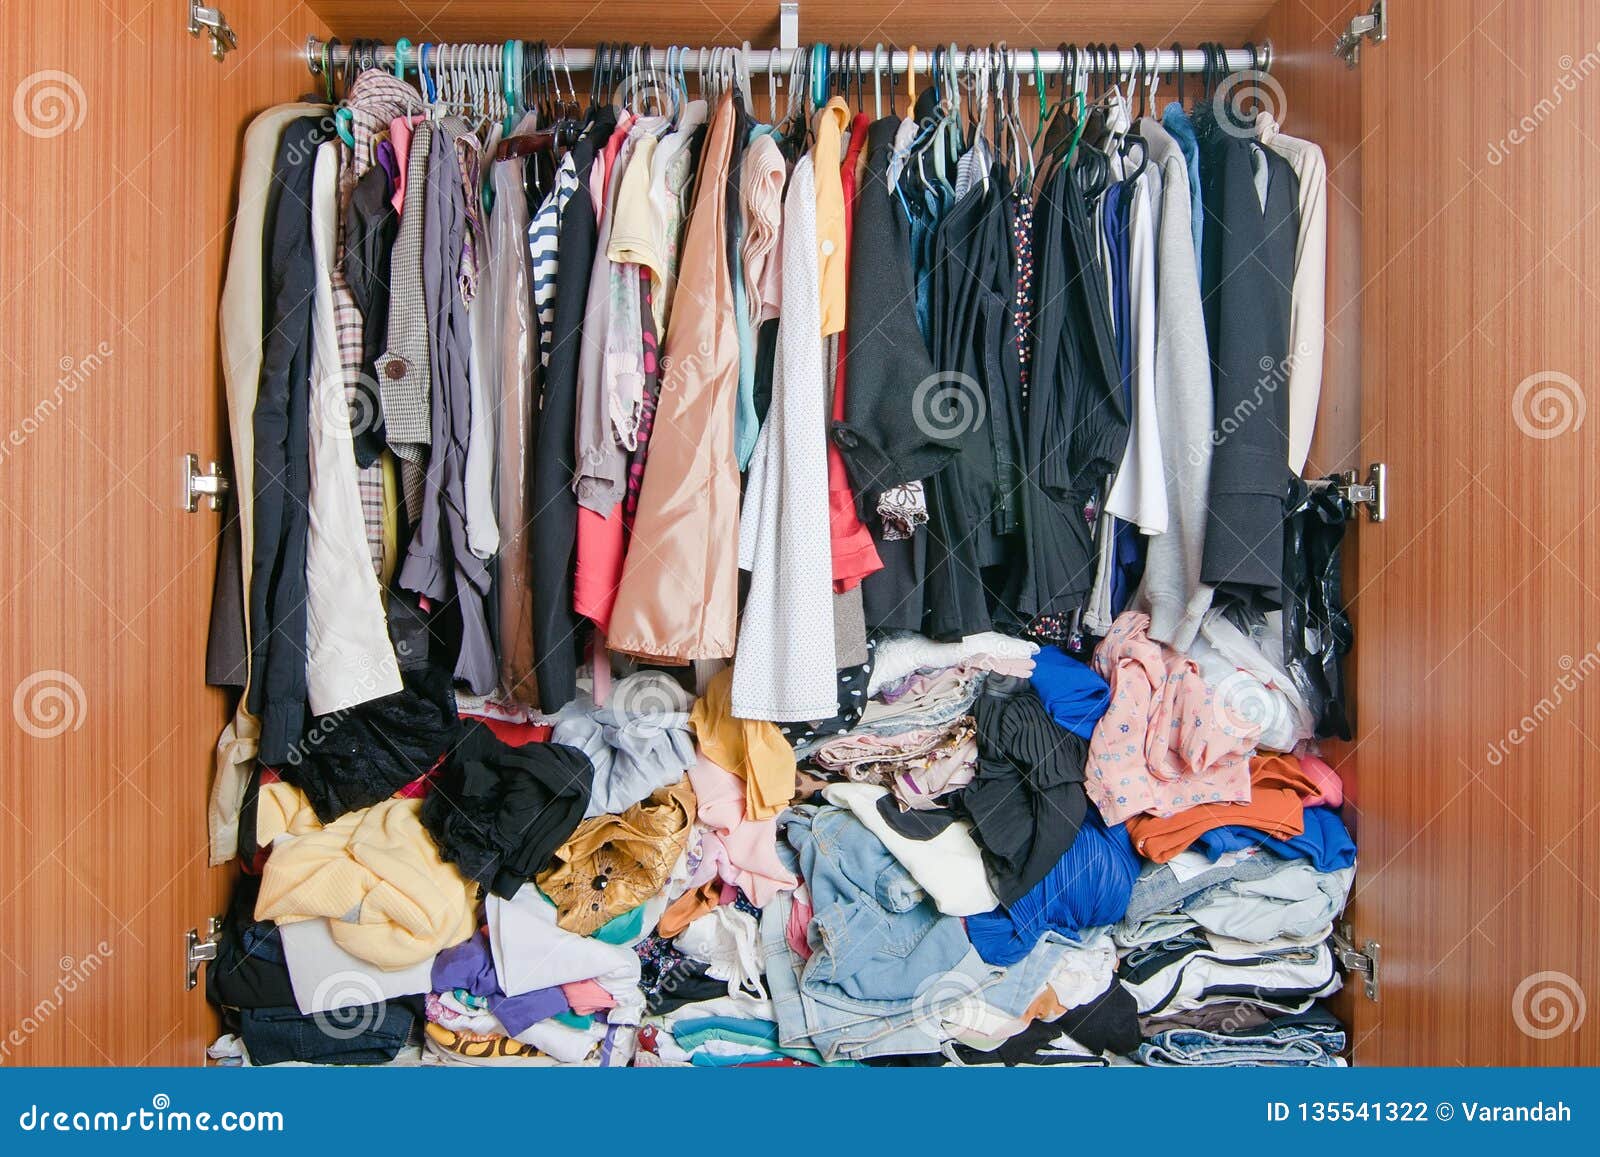 pile of messy clothes in closet. untidy cluttered woman wardrobe